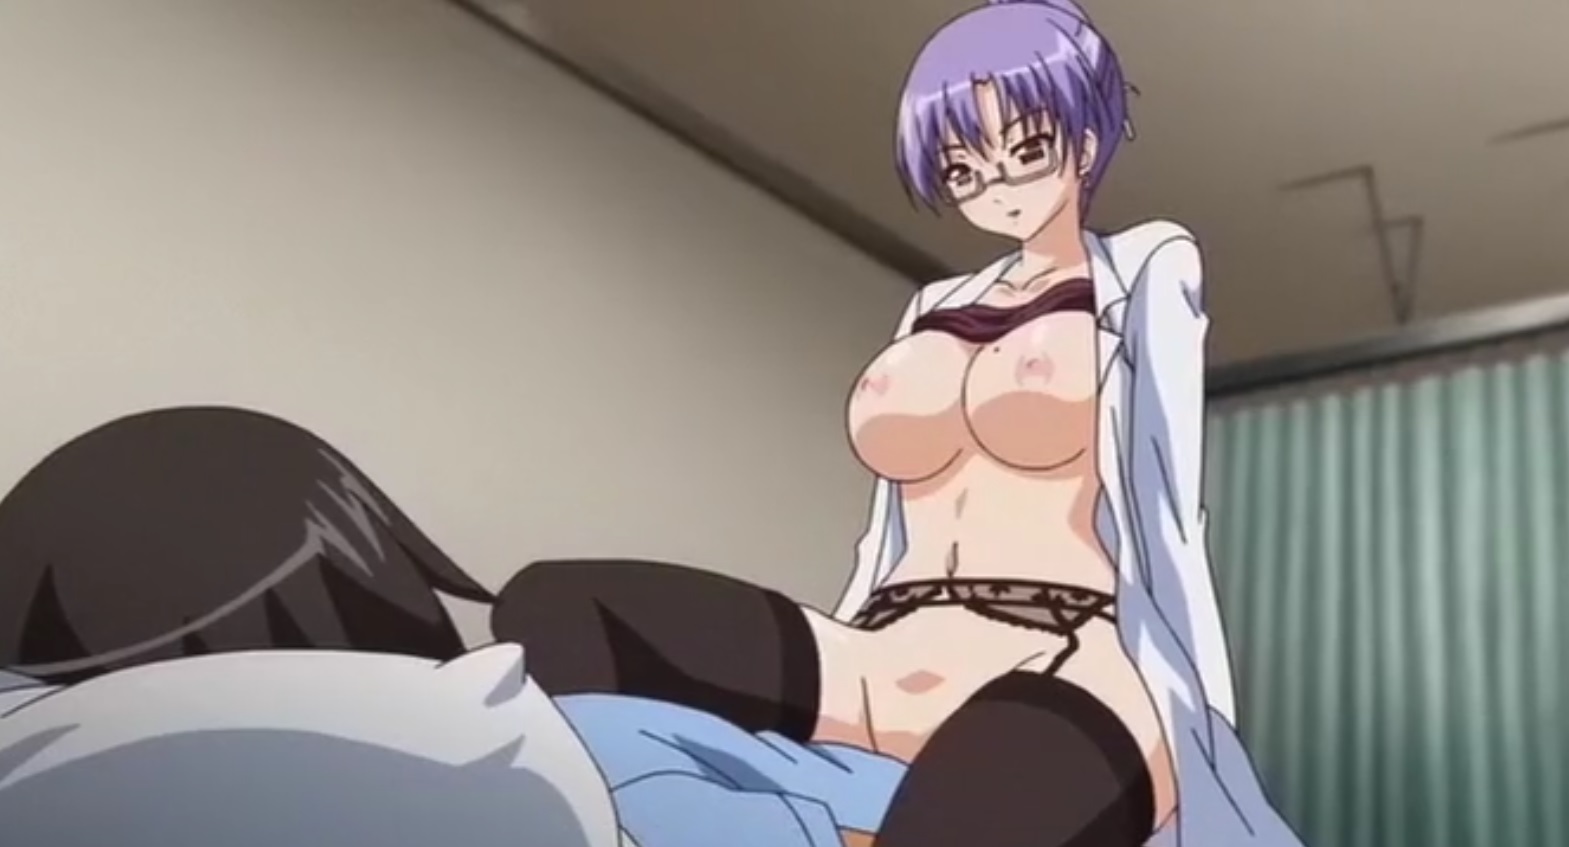 Anime Sex Office - Hot Office Hentai Video Fuck - HentaiVideo.tv